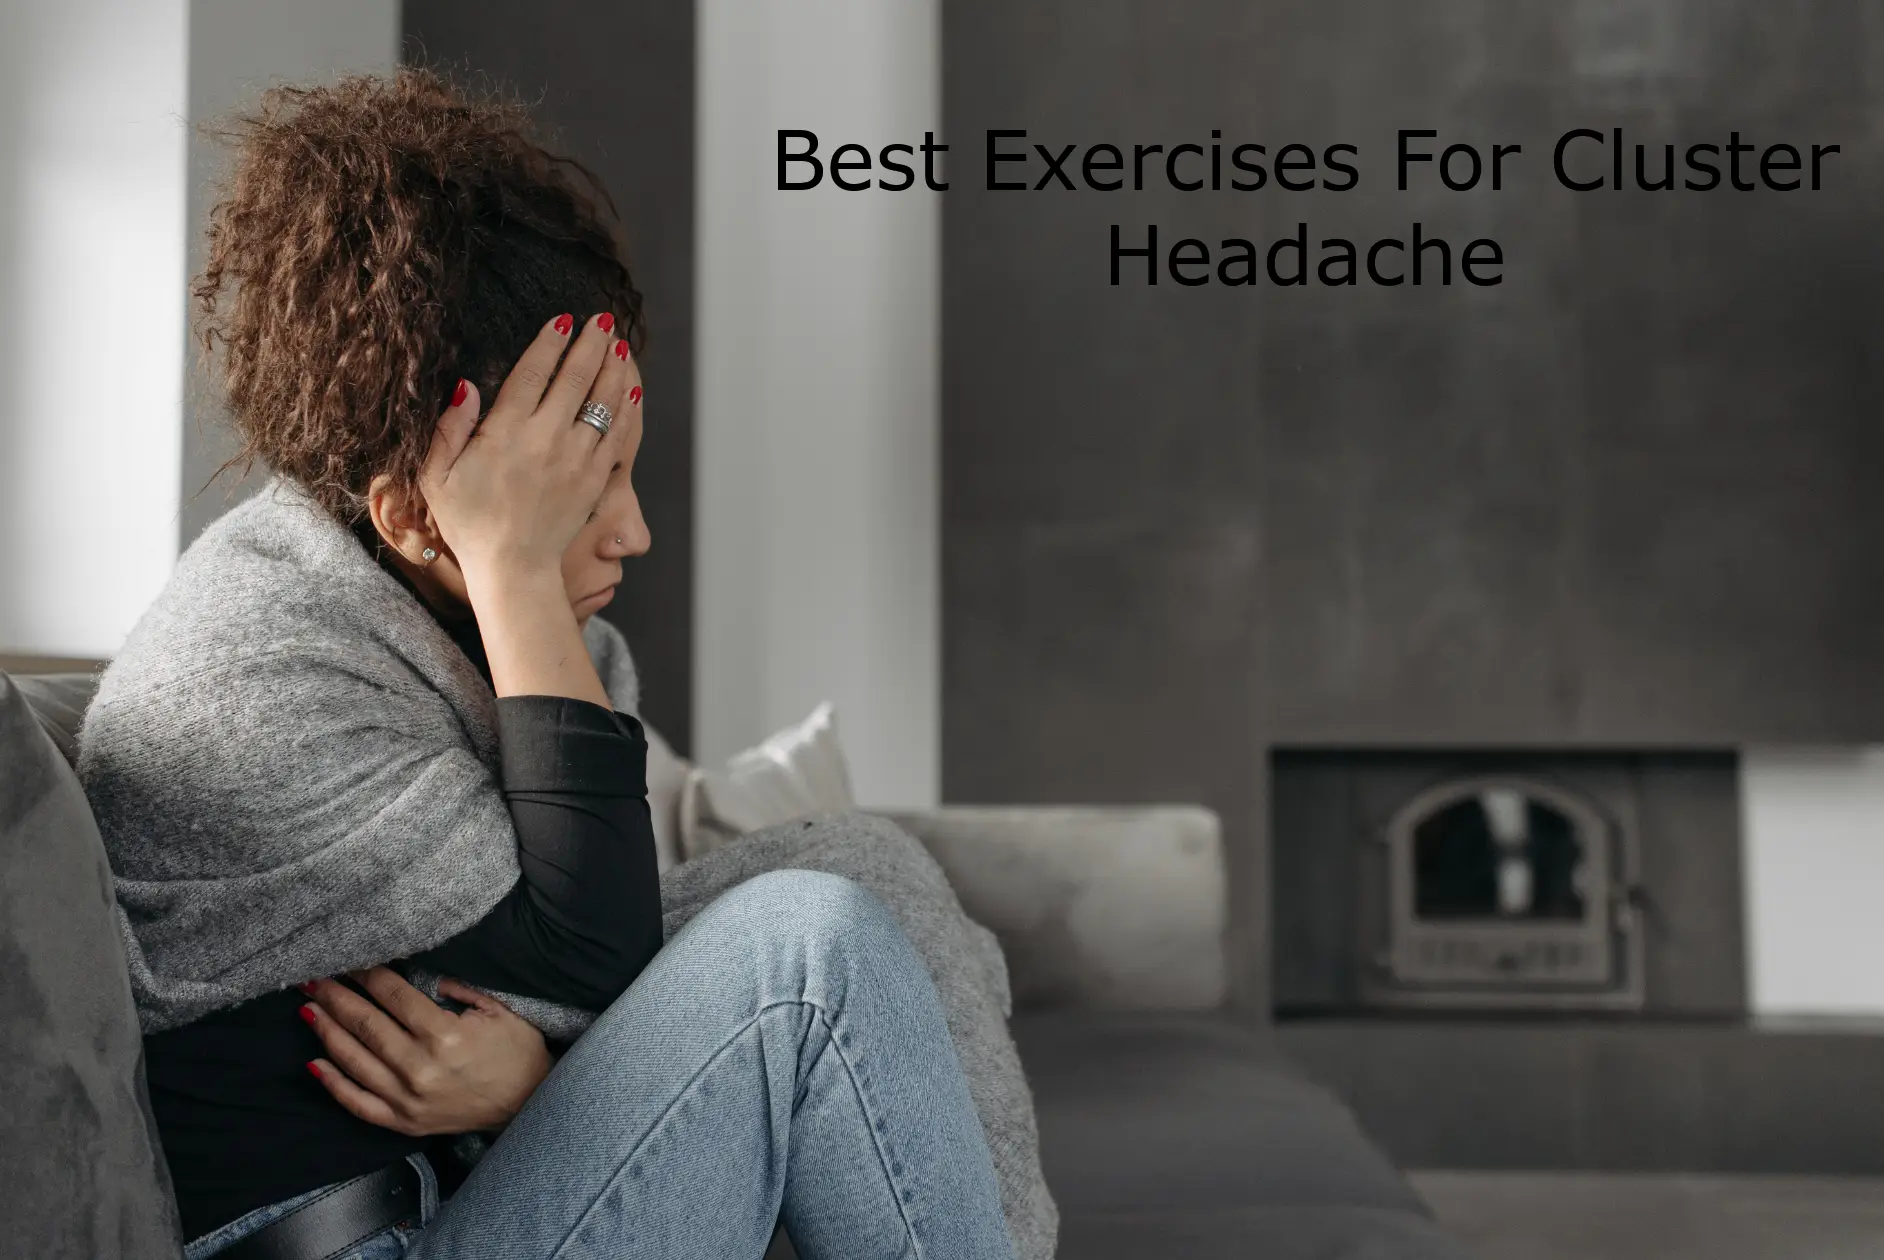 Best Exercises For Cluster Headache